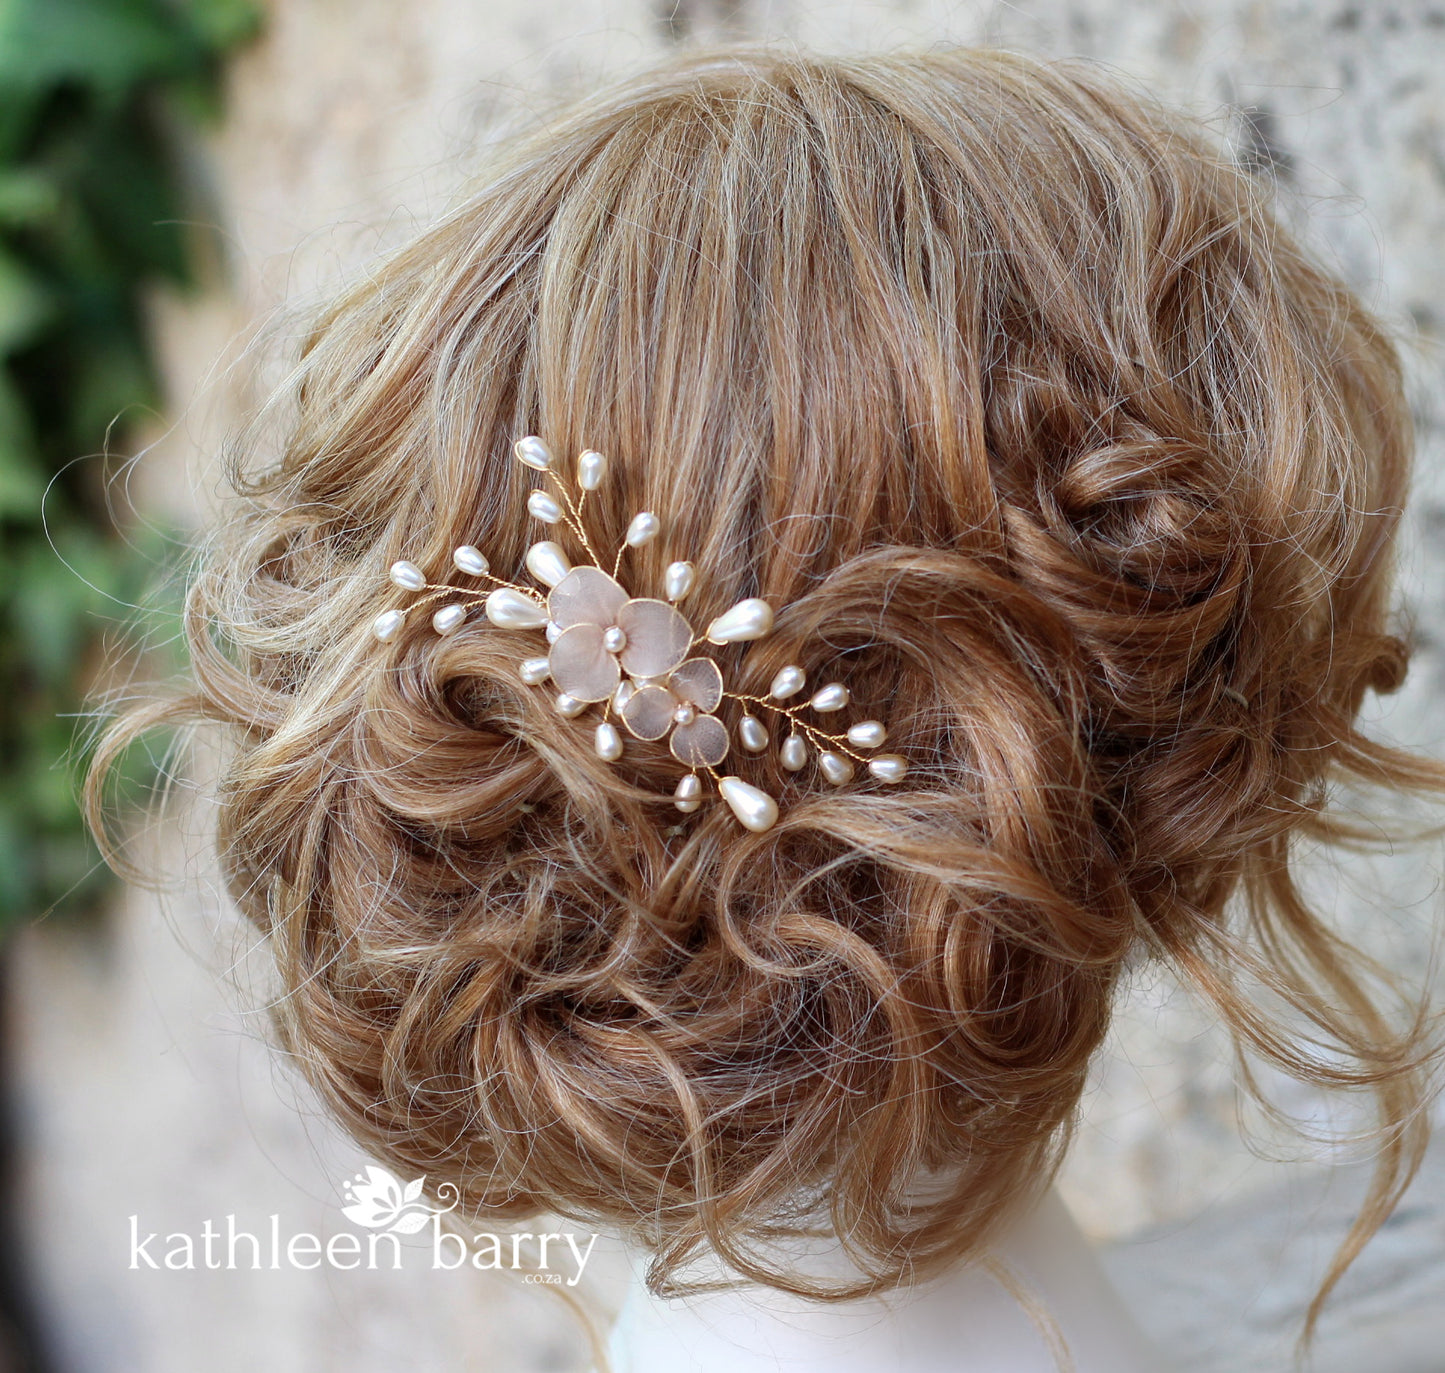 Alison pearl floral hair comb - Color options and metallic finishes available